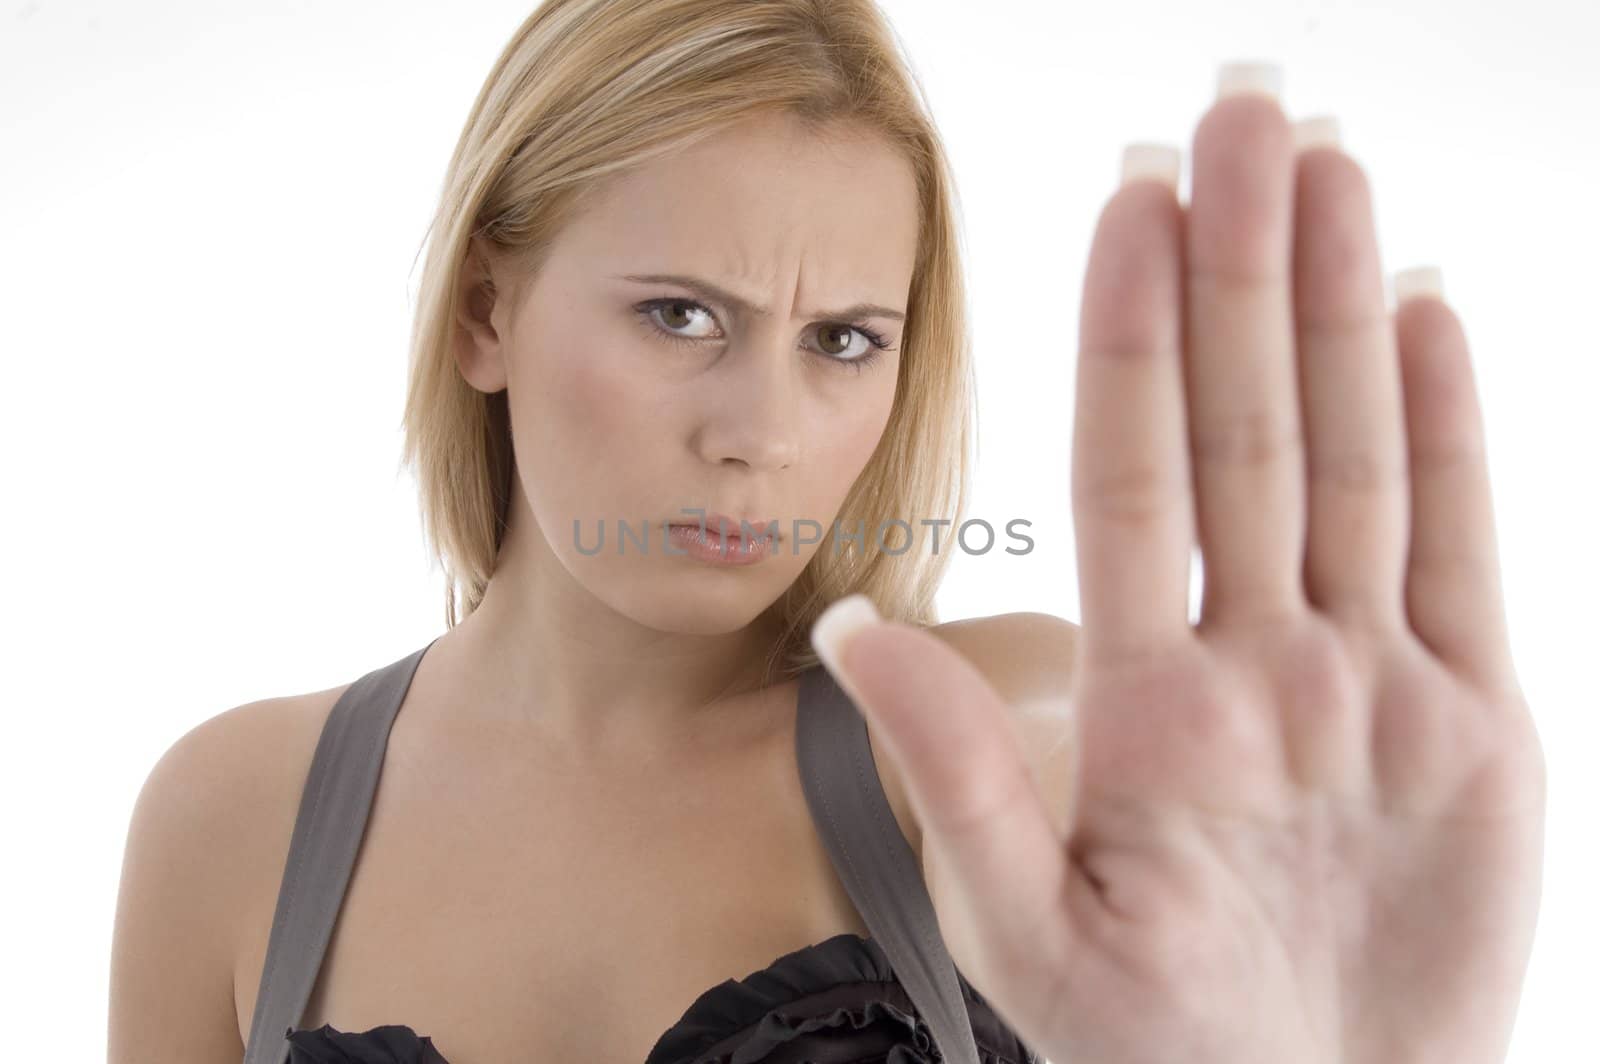 angry woman showing stopping gesture on an isolated white background